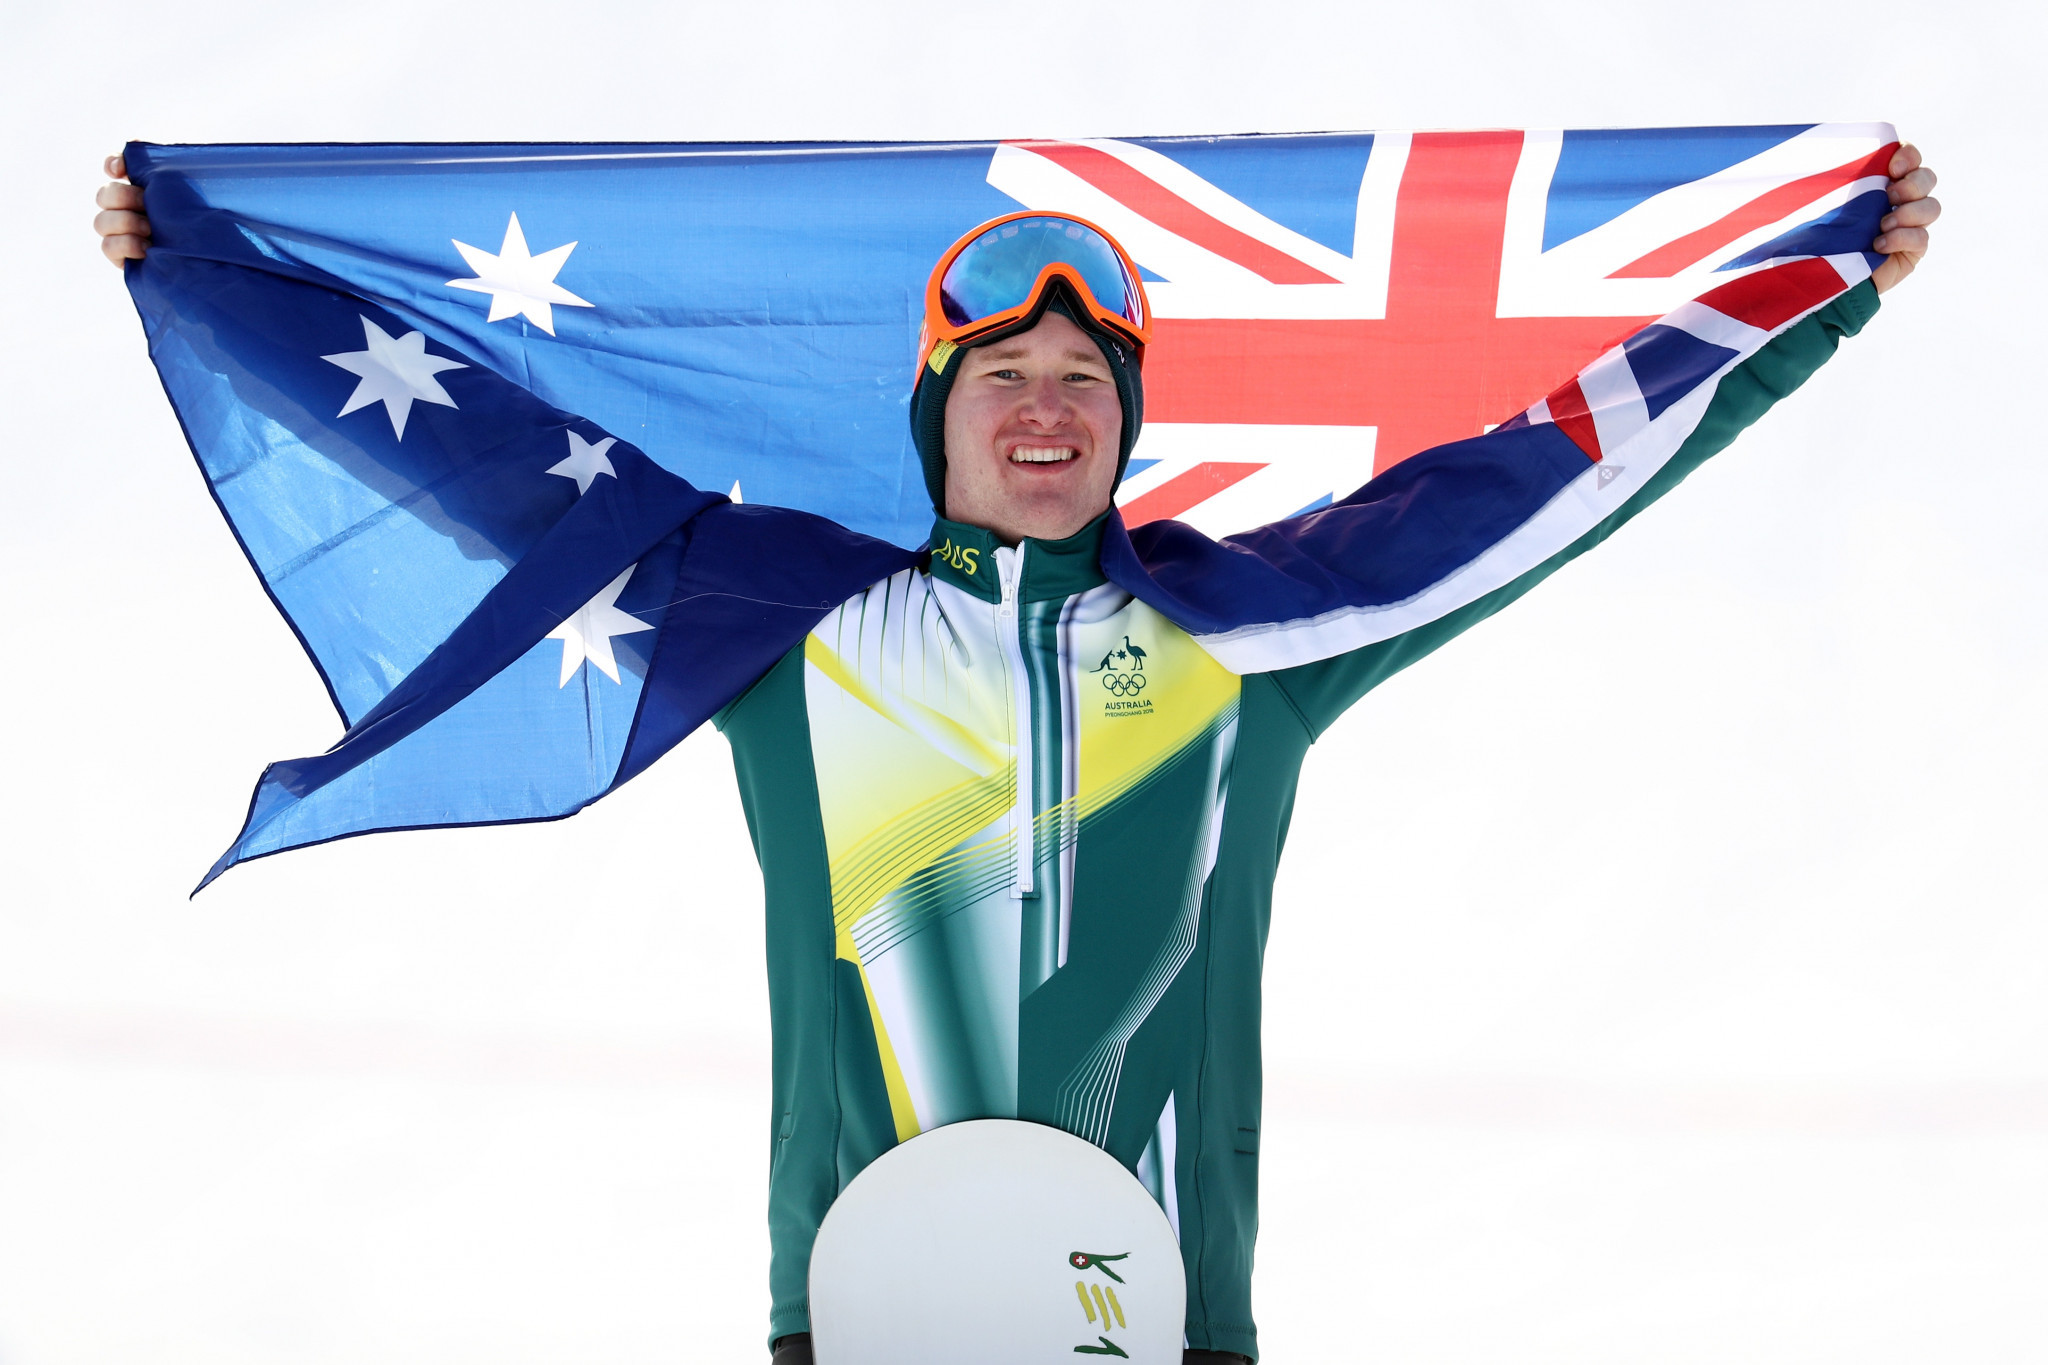 Jarryd Hughes earned snowboard cross silver at Pyeongchang 2018 ©Getty Images